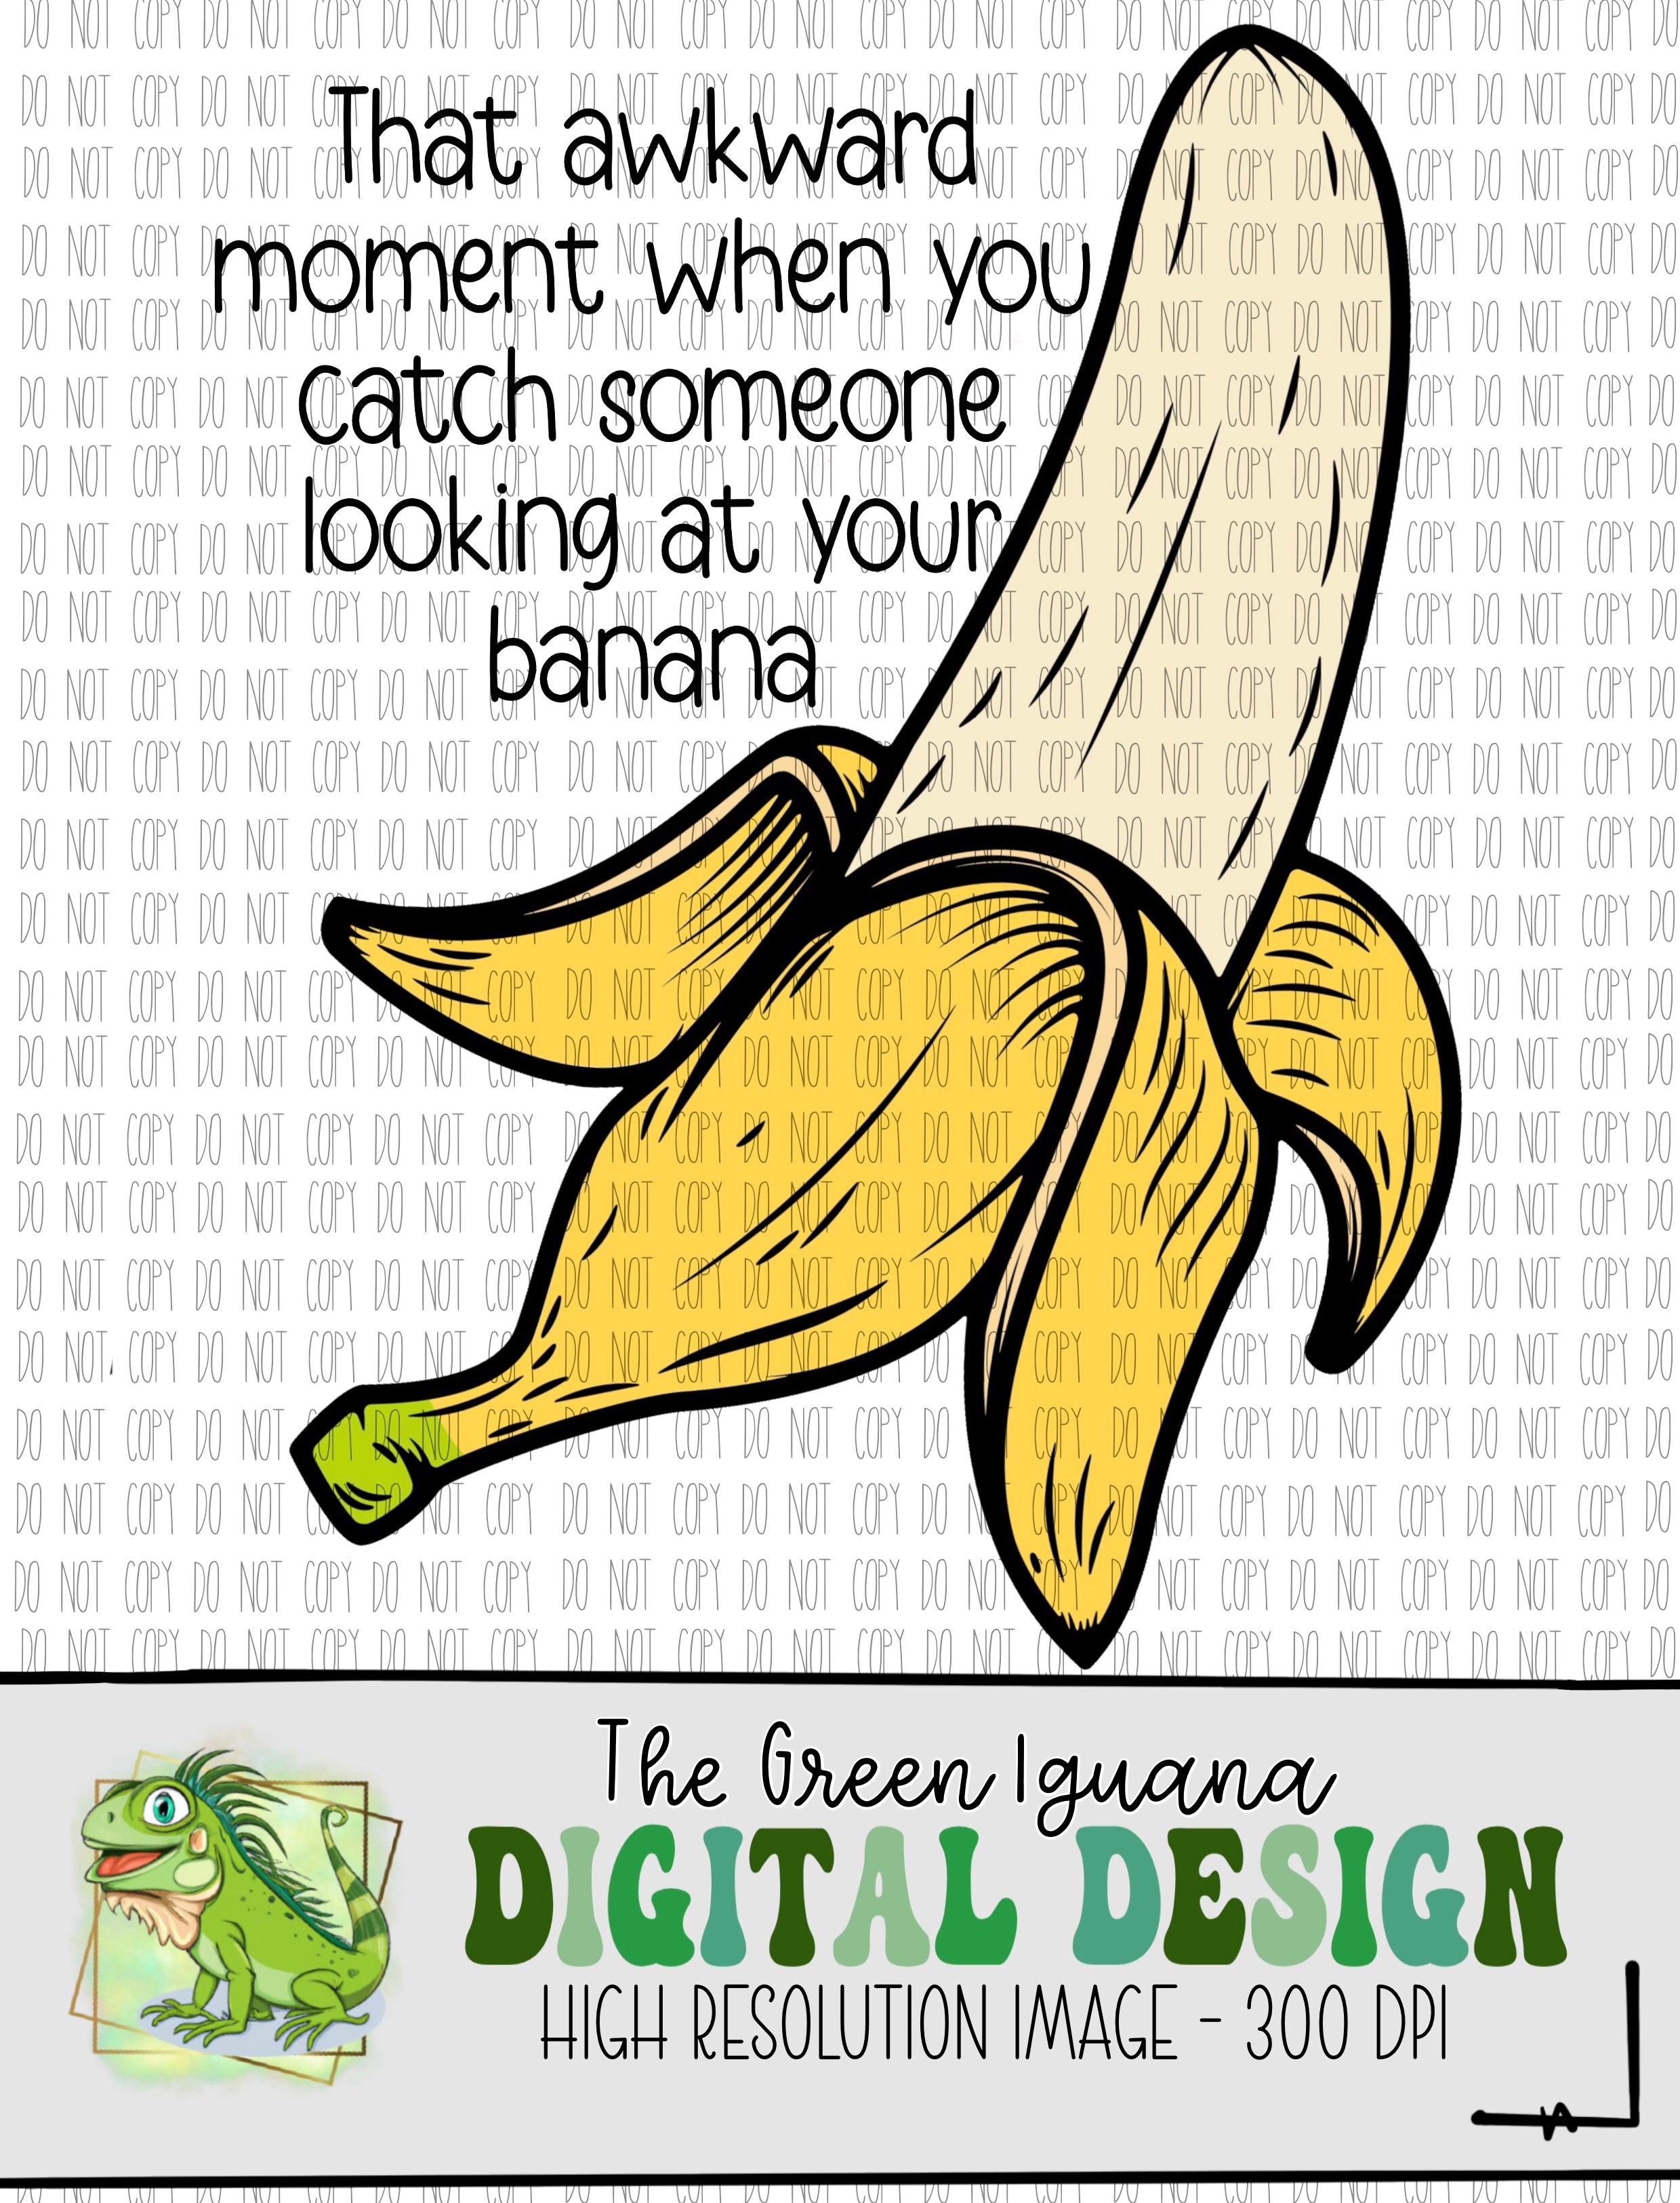 That awkward moment when you catch someone looking at your banana - DIGITAL